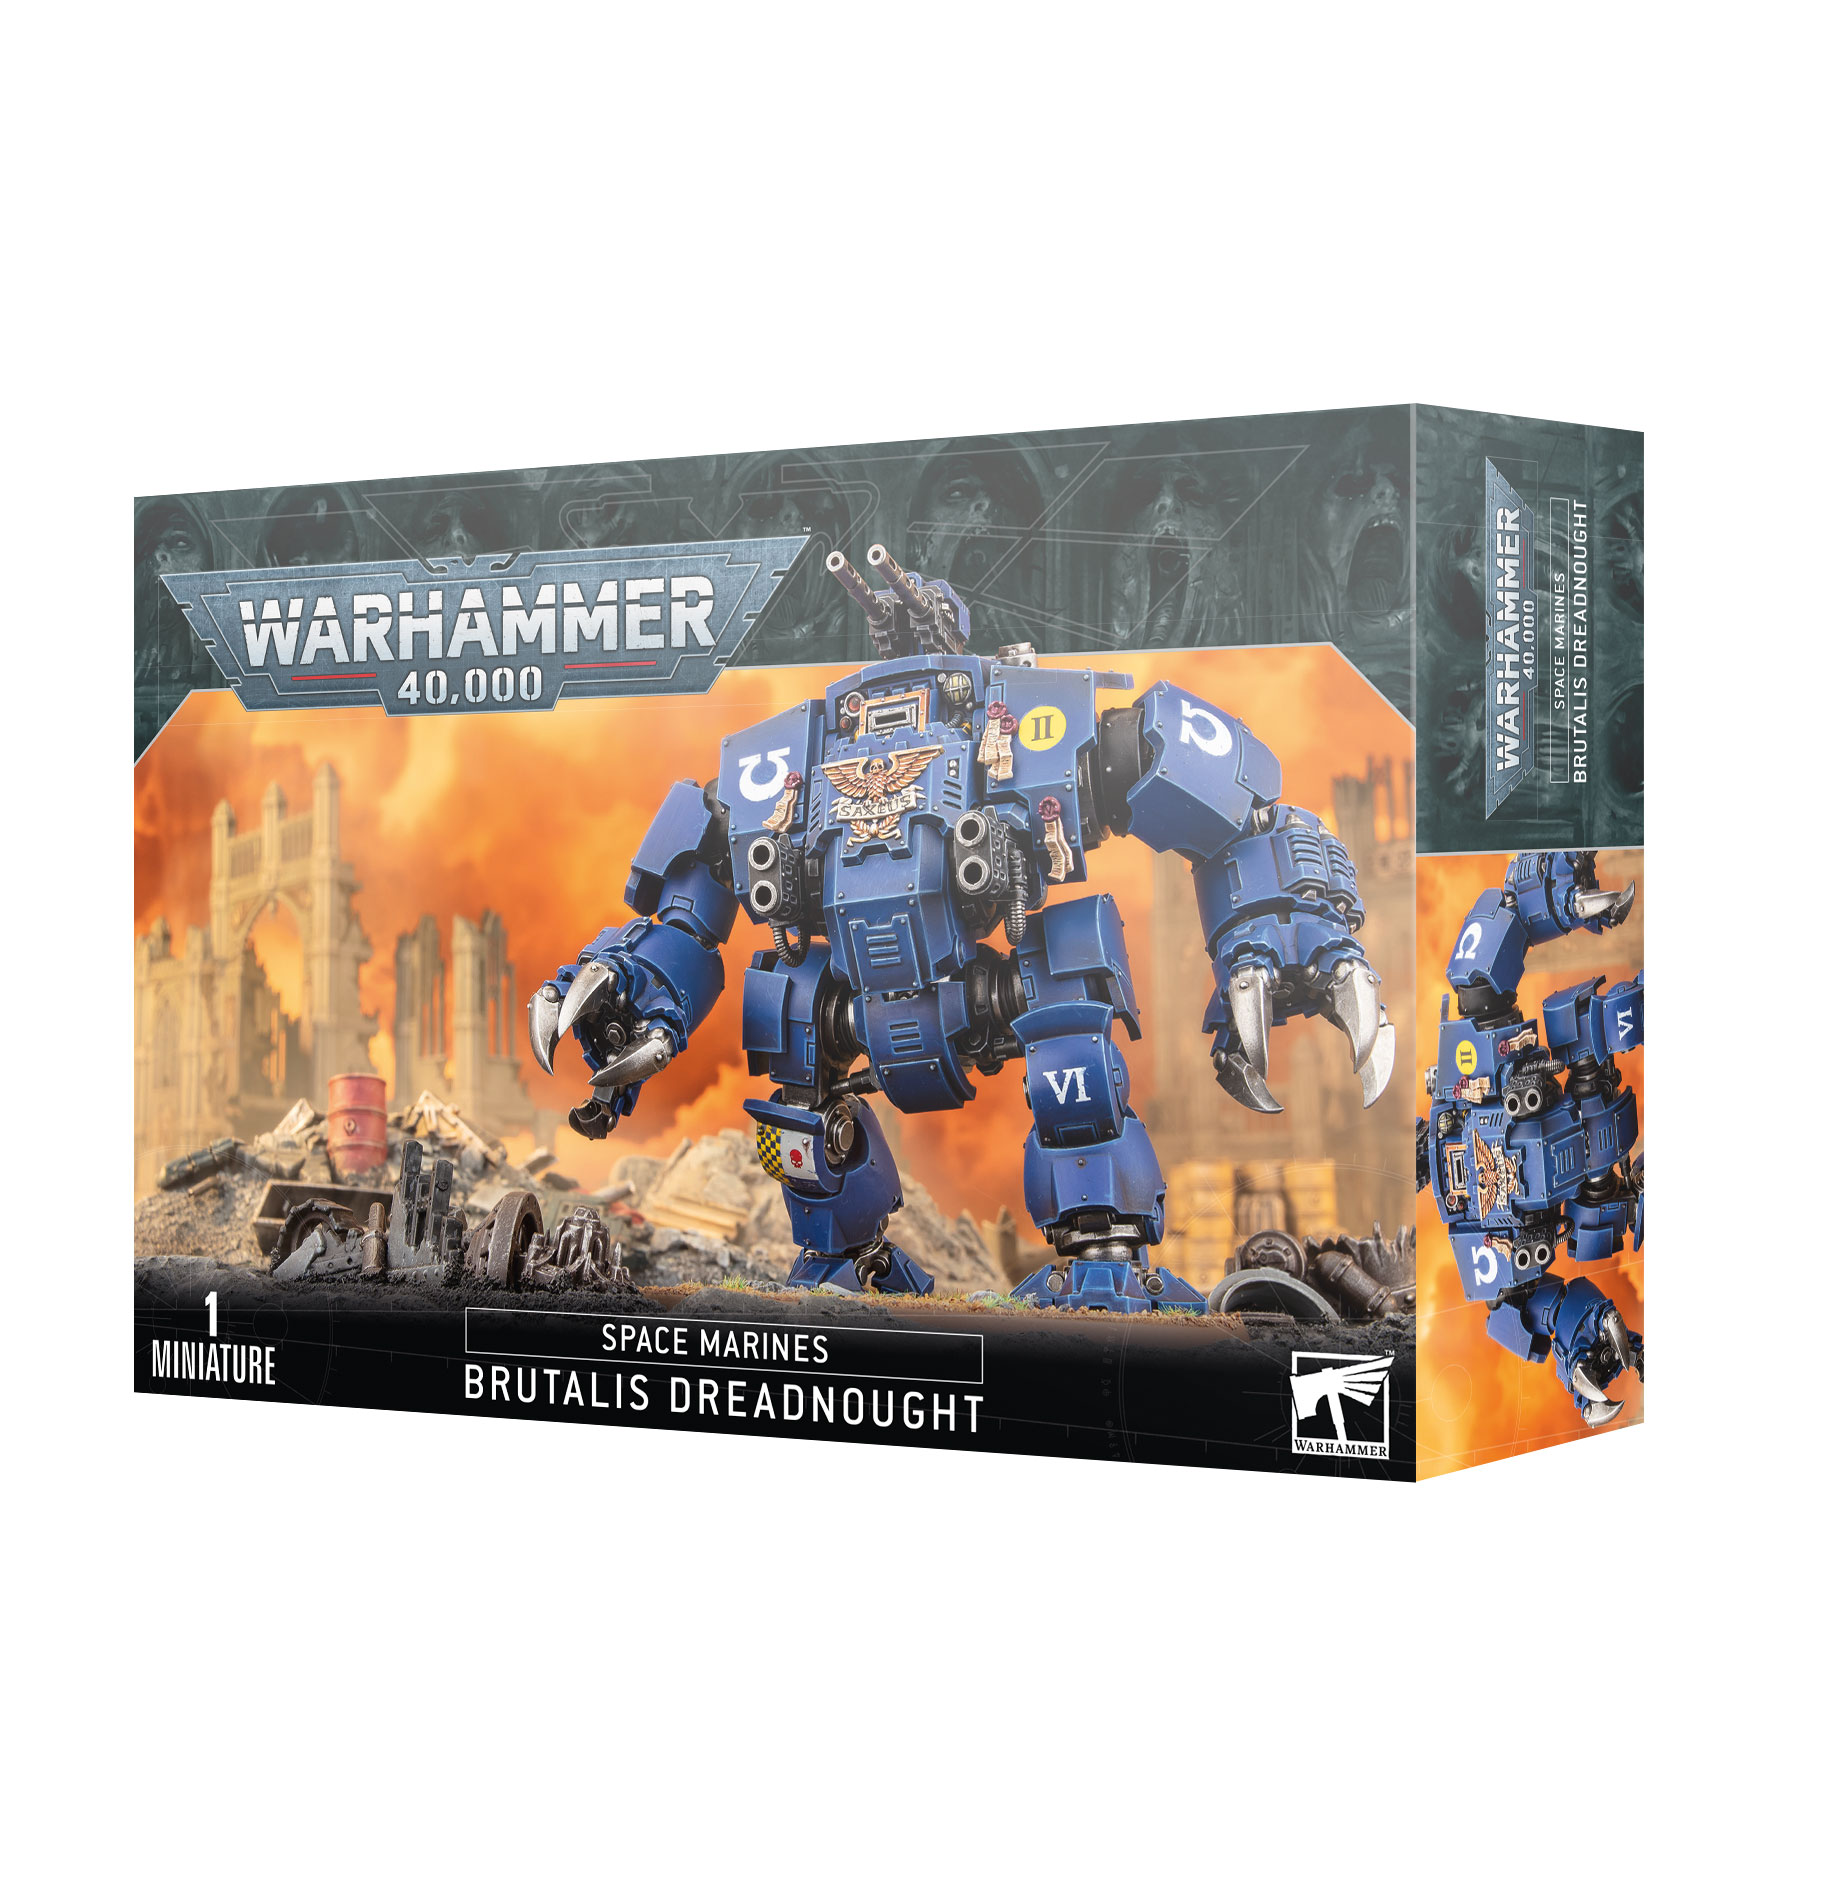 Warhammer 40,000: Space Marines: Brutalis Dreadnought 